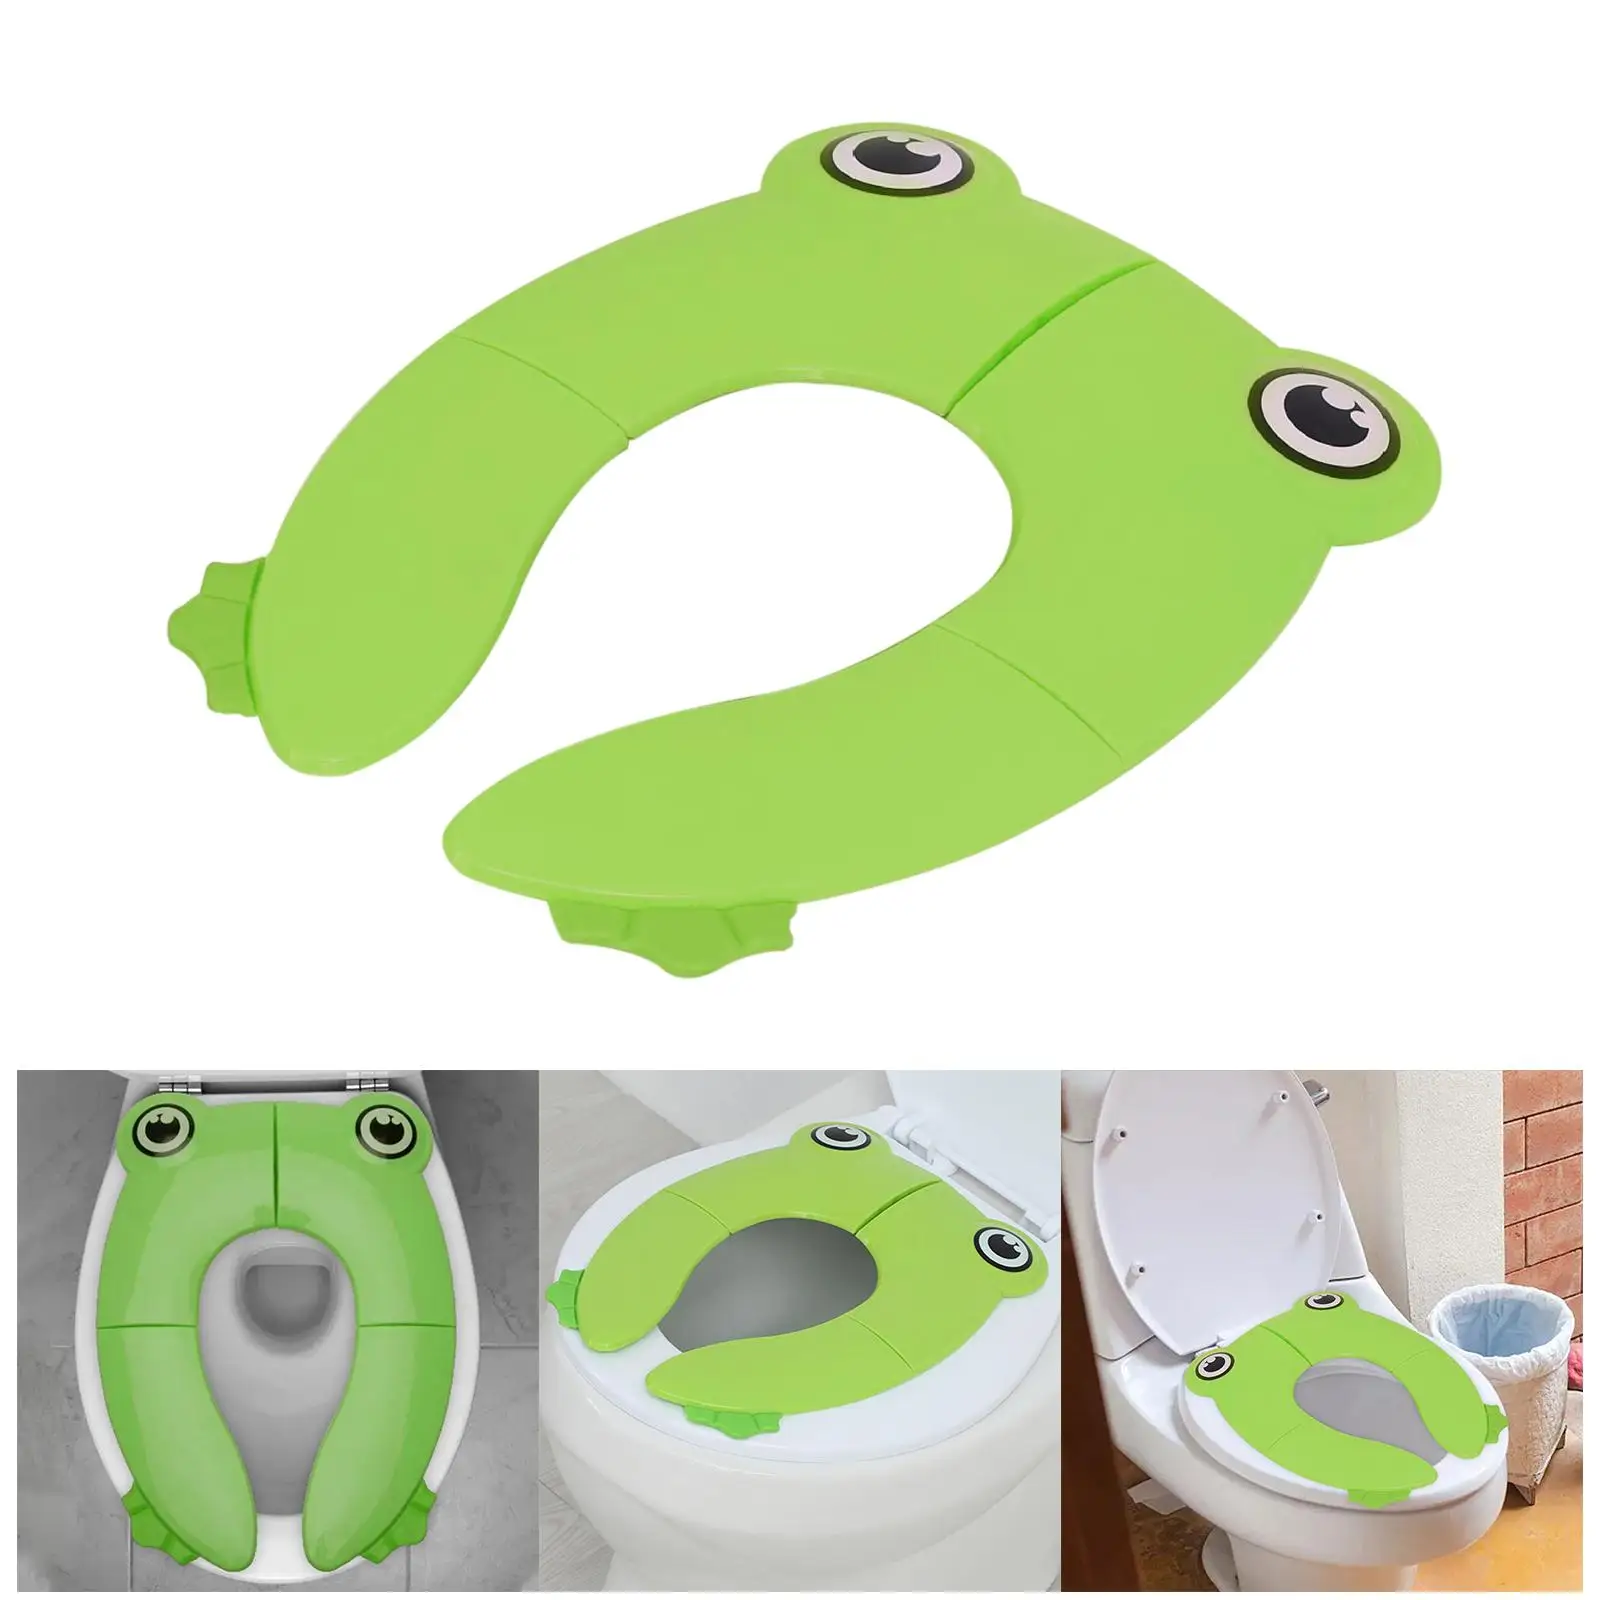 Toilet Cover Folding Practical Potty Seat Pads for Camping Home Use Toddler